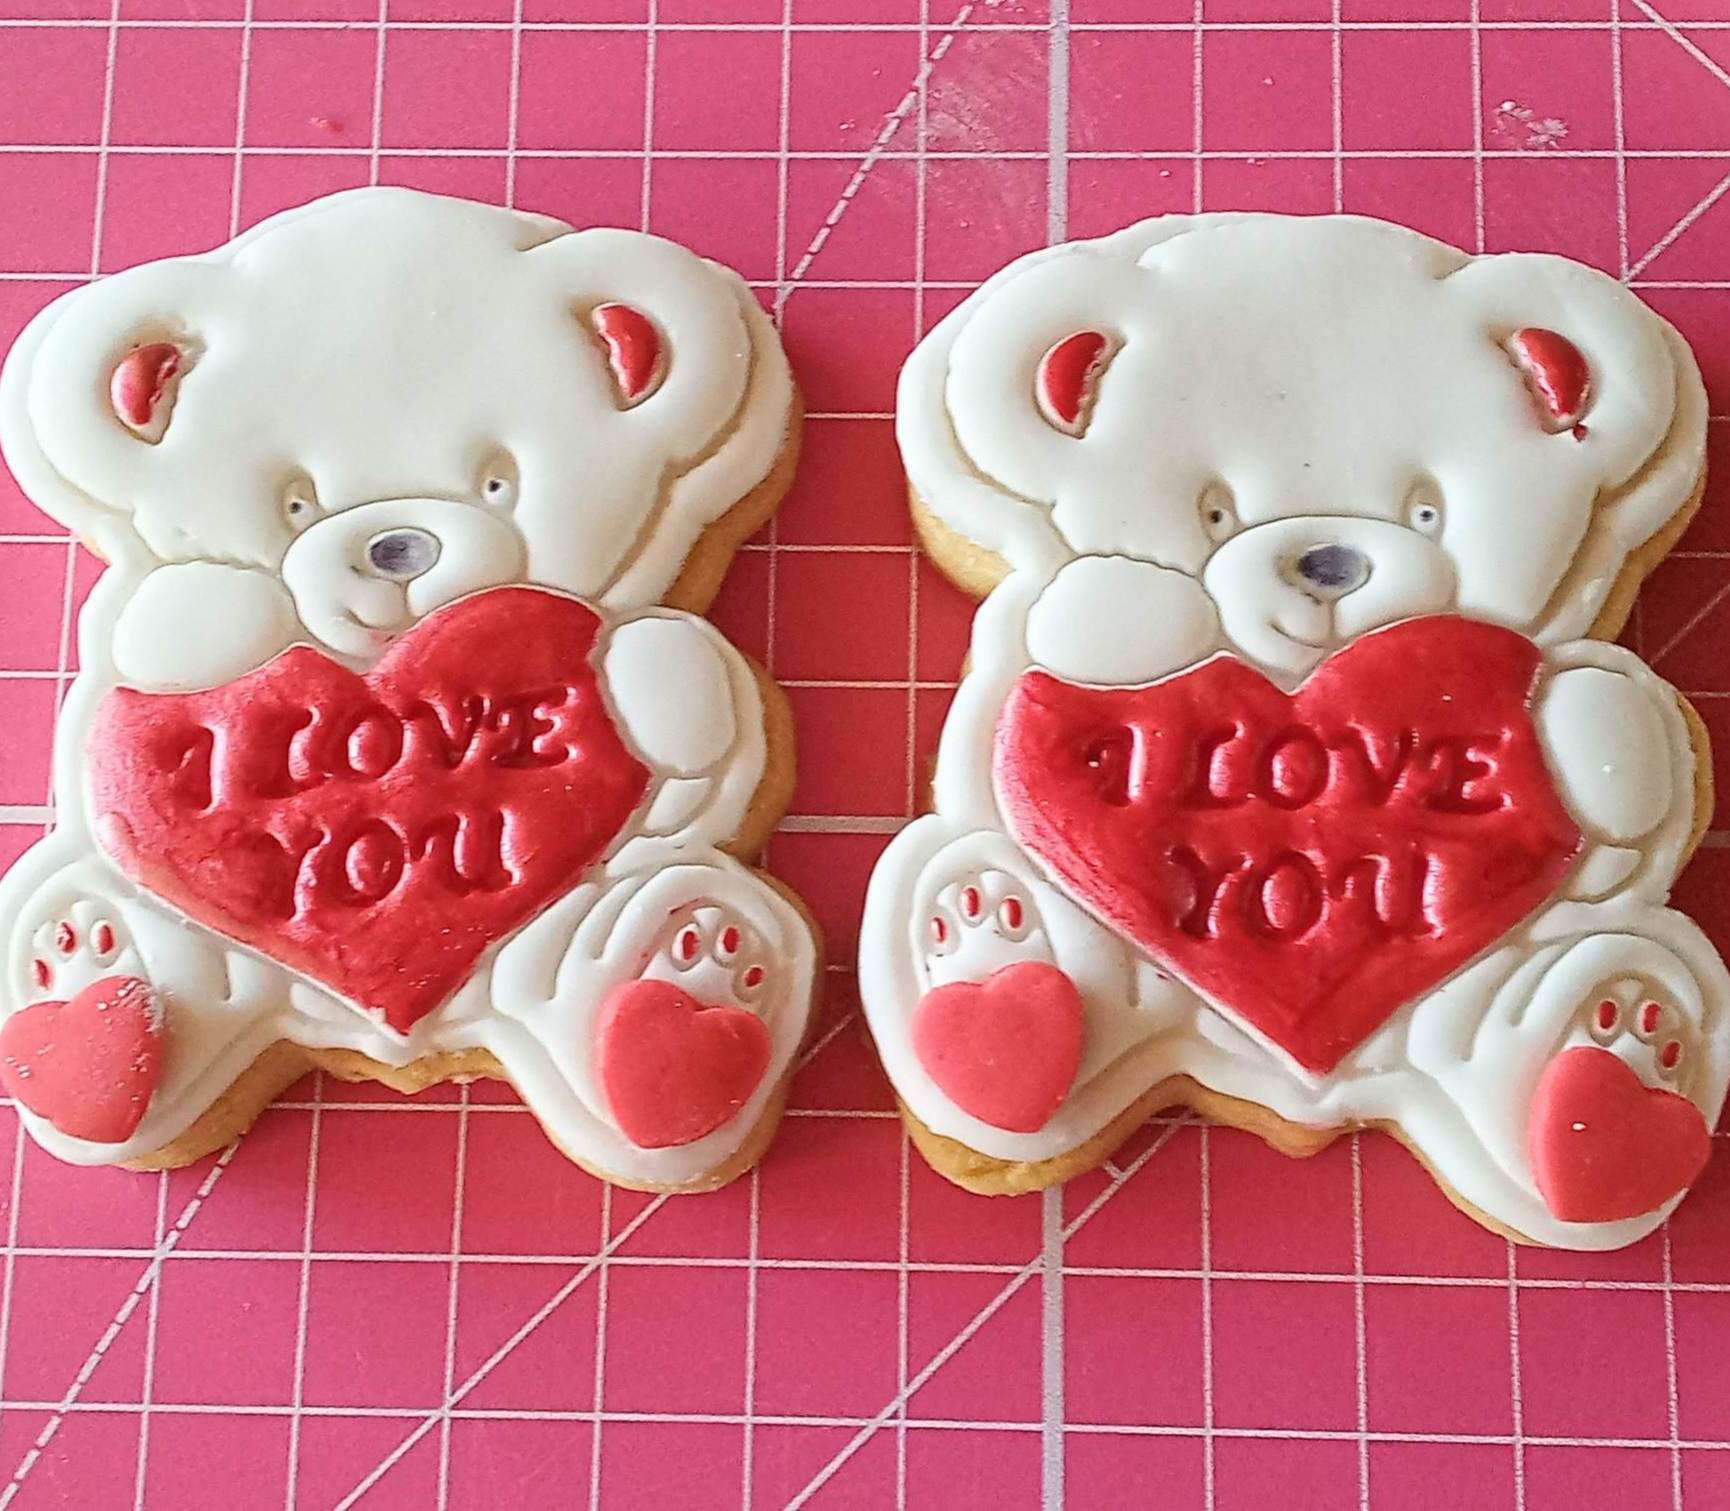 "I love you" valentines cookie bear